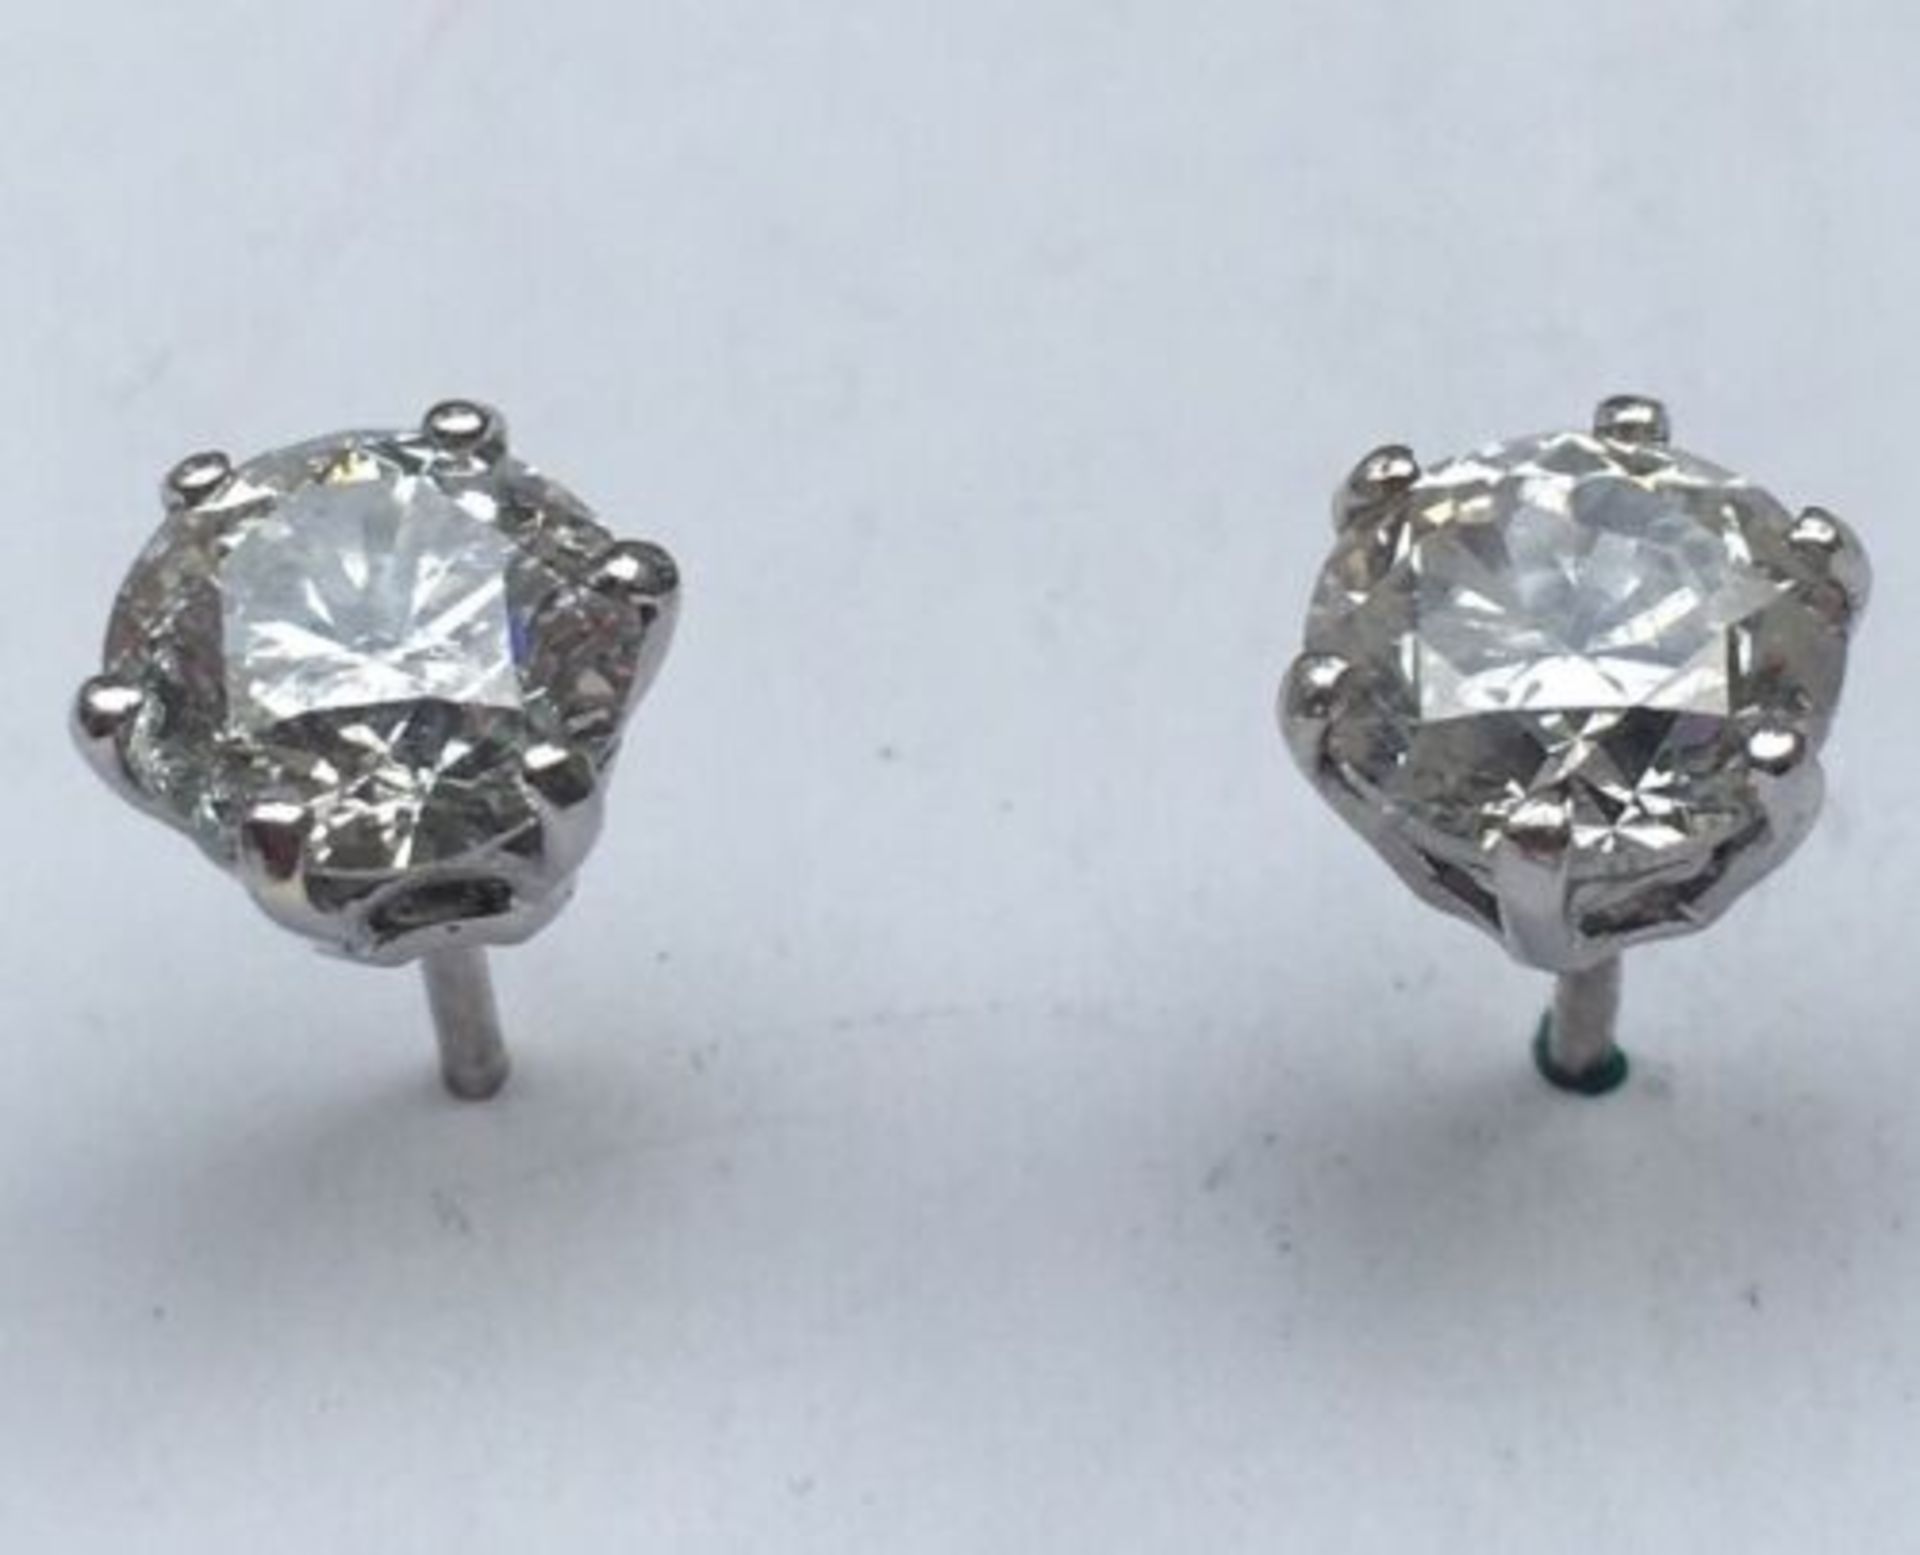 3.60ct Diamond Solitaire Earrings 18ct Gold Studs